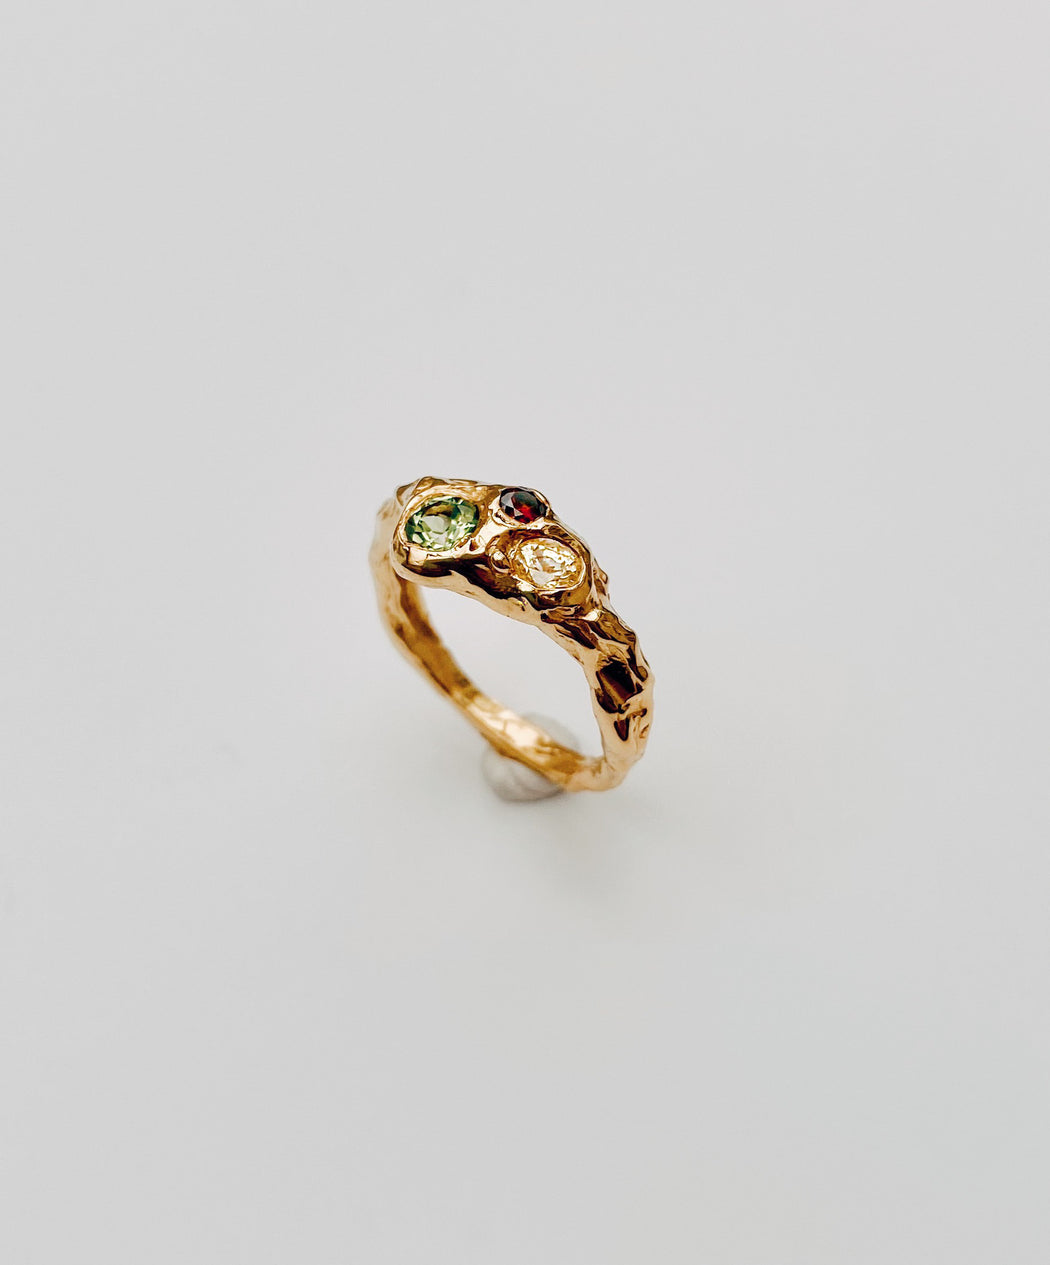 Ring 18k gold with diamond, peridot and sapphire